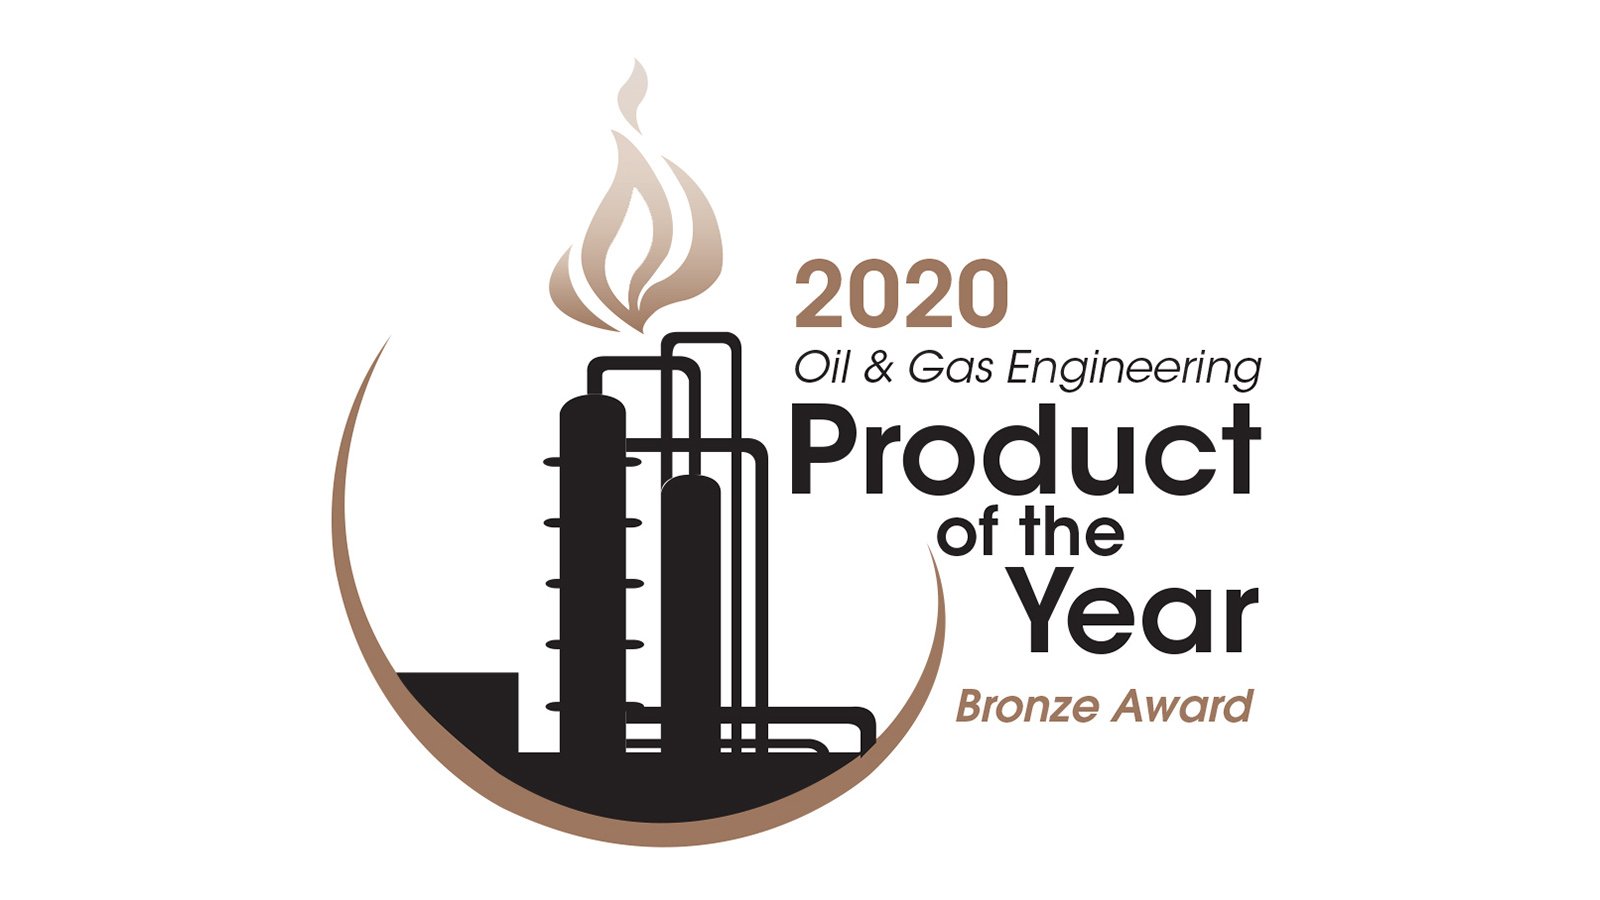 Allen-Bradley® FLEX 5000™ safety I/O modules are the Bronze Award winner in the Oil & Gas Engineering 2020 Product of the Year – IIoT & Process Control Category.  